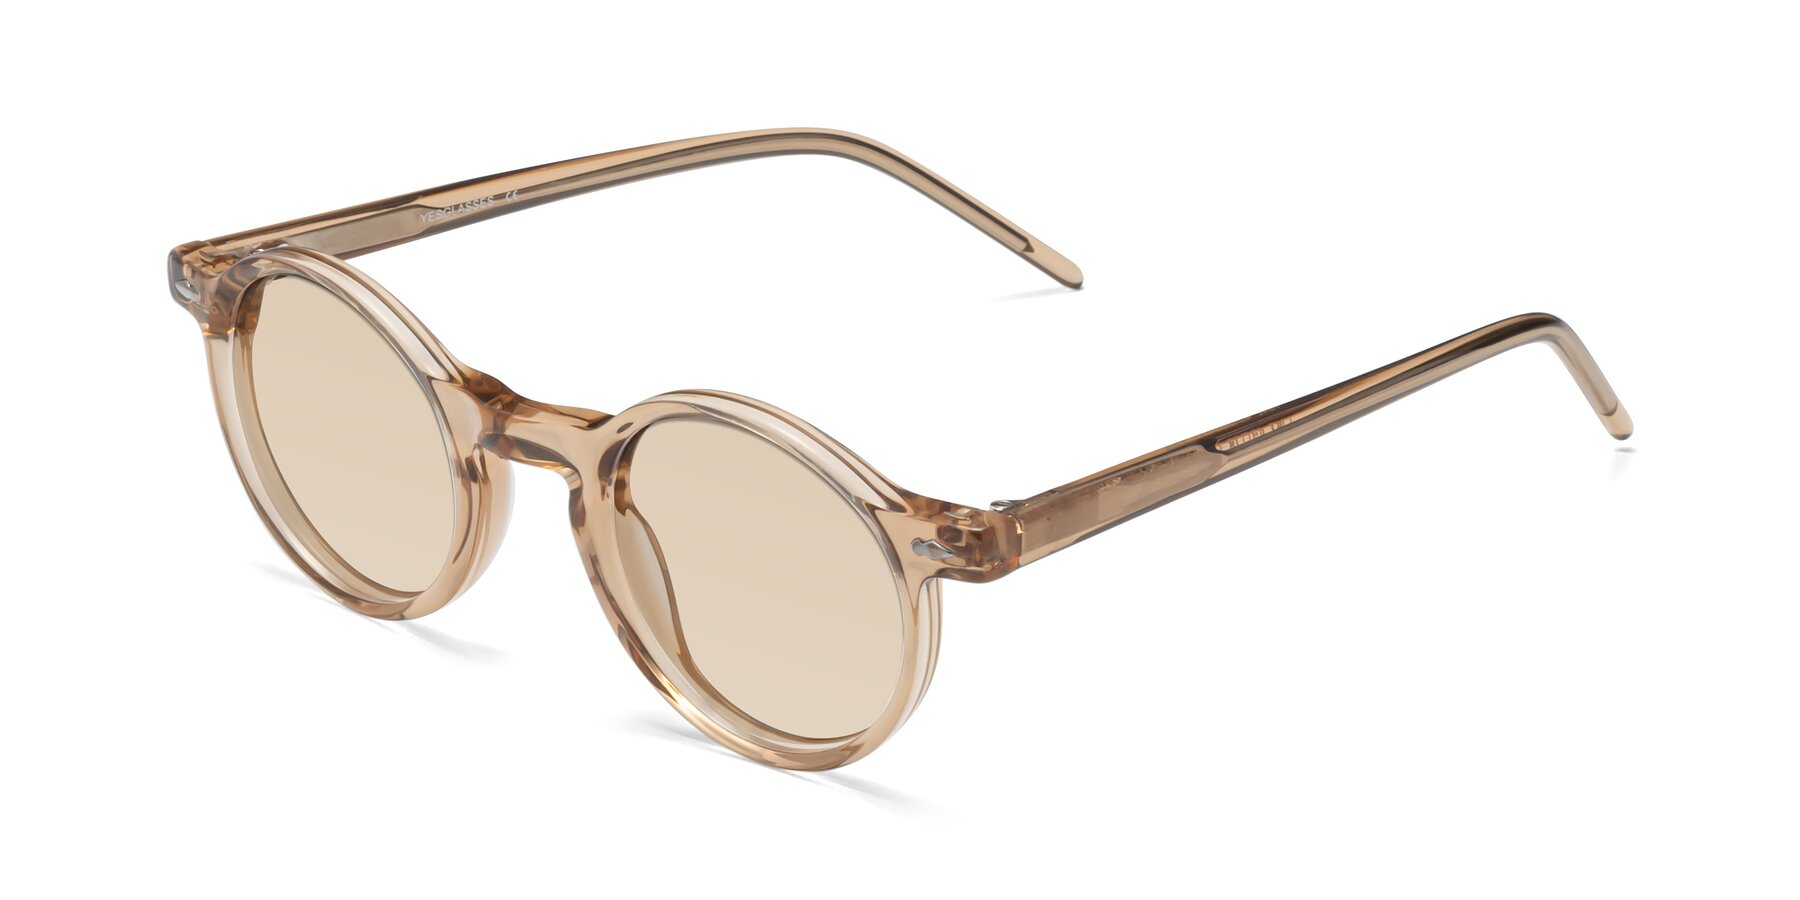 Angle of 1542 in Caramel with Light Brown Tinted Lenses